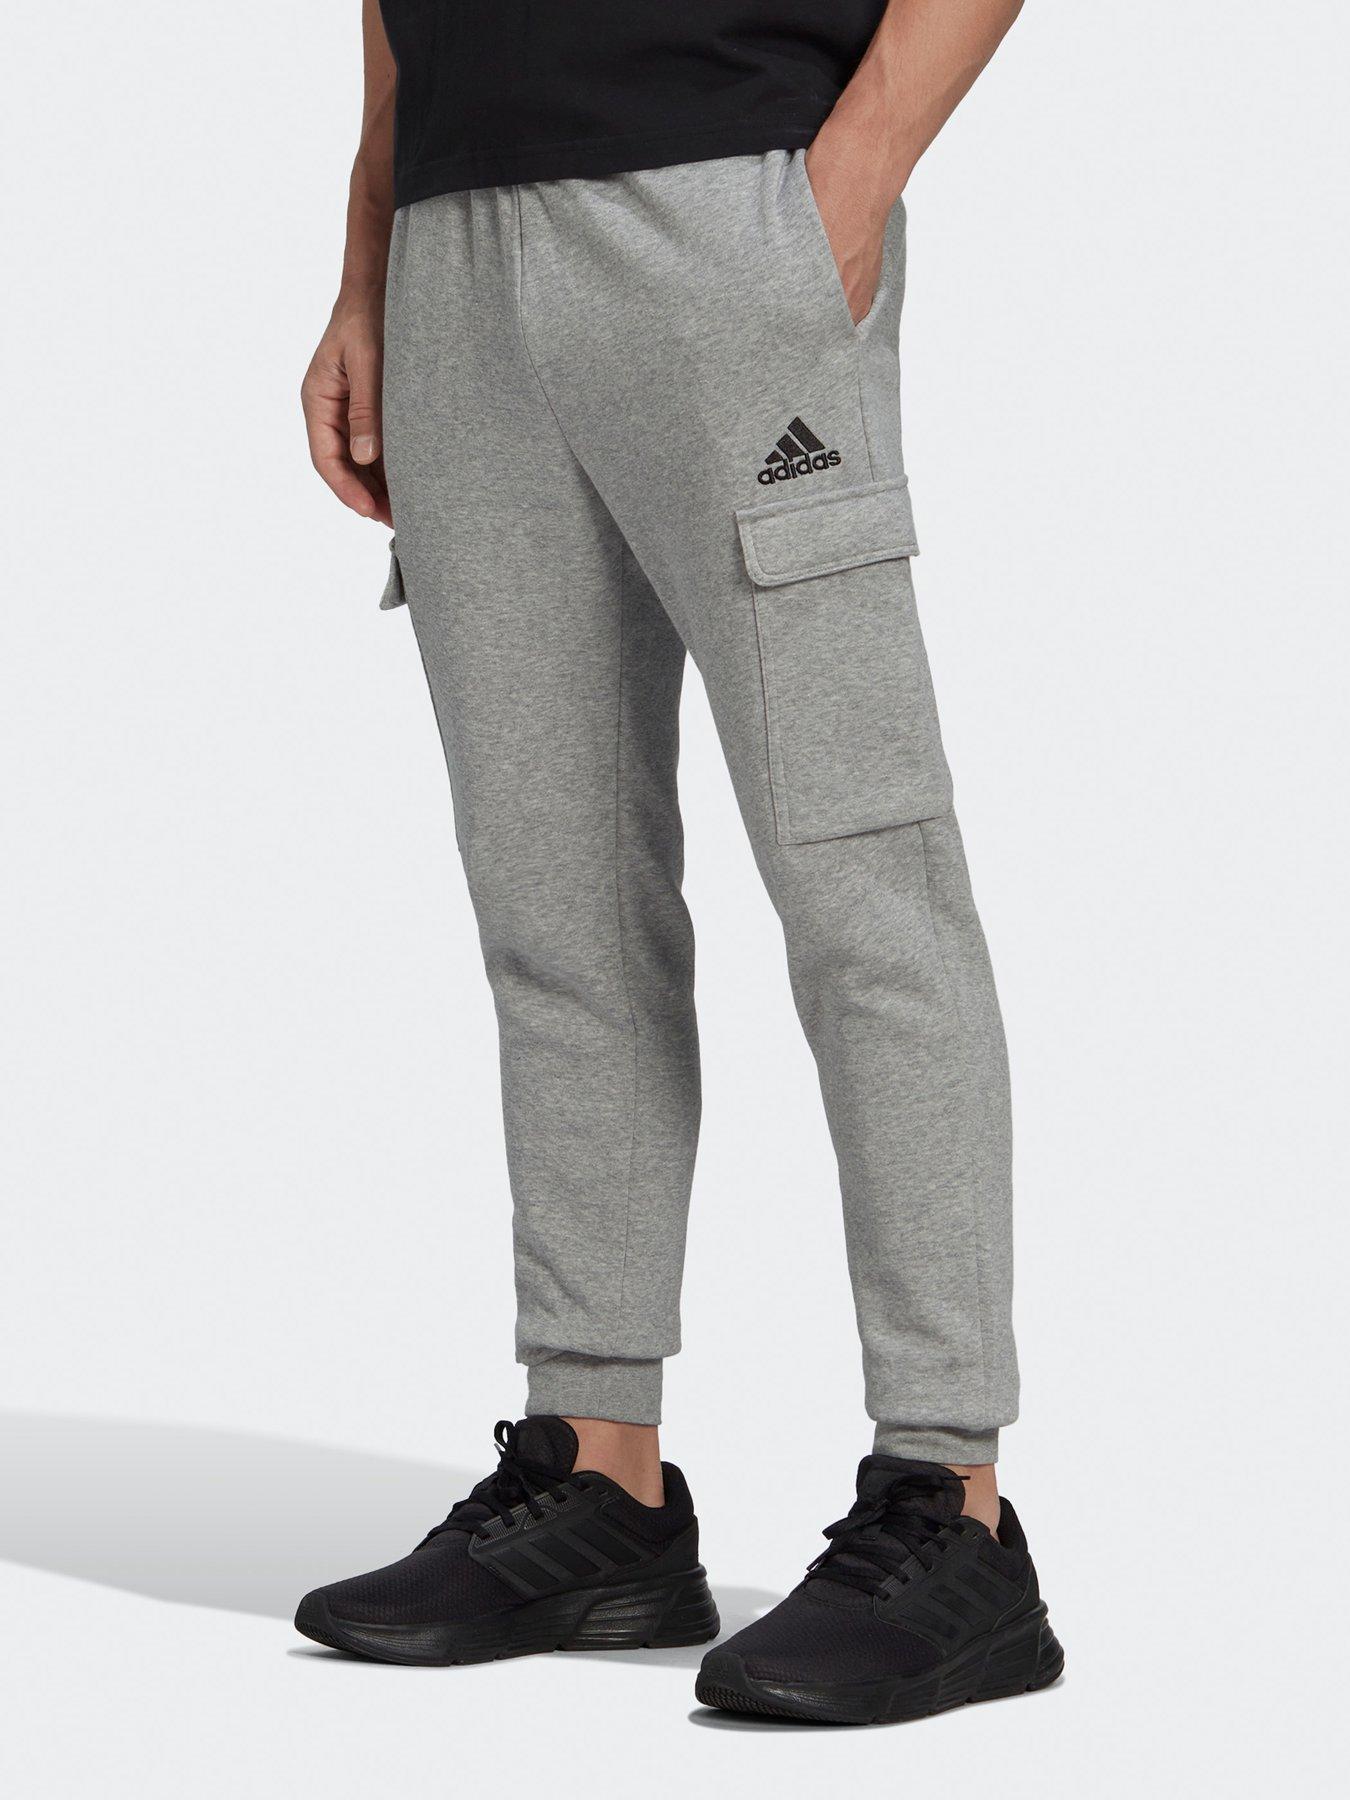 3XL | Adidas | Jogging bottoms Mens sports clothing | Sports | www.very.co.uk